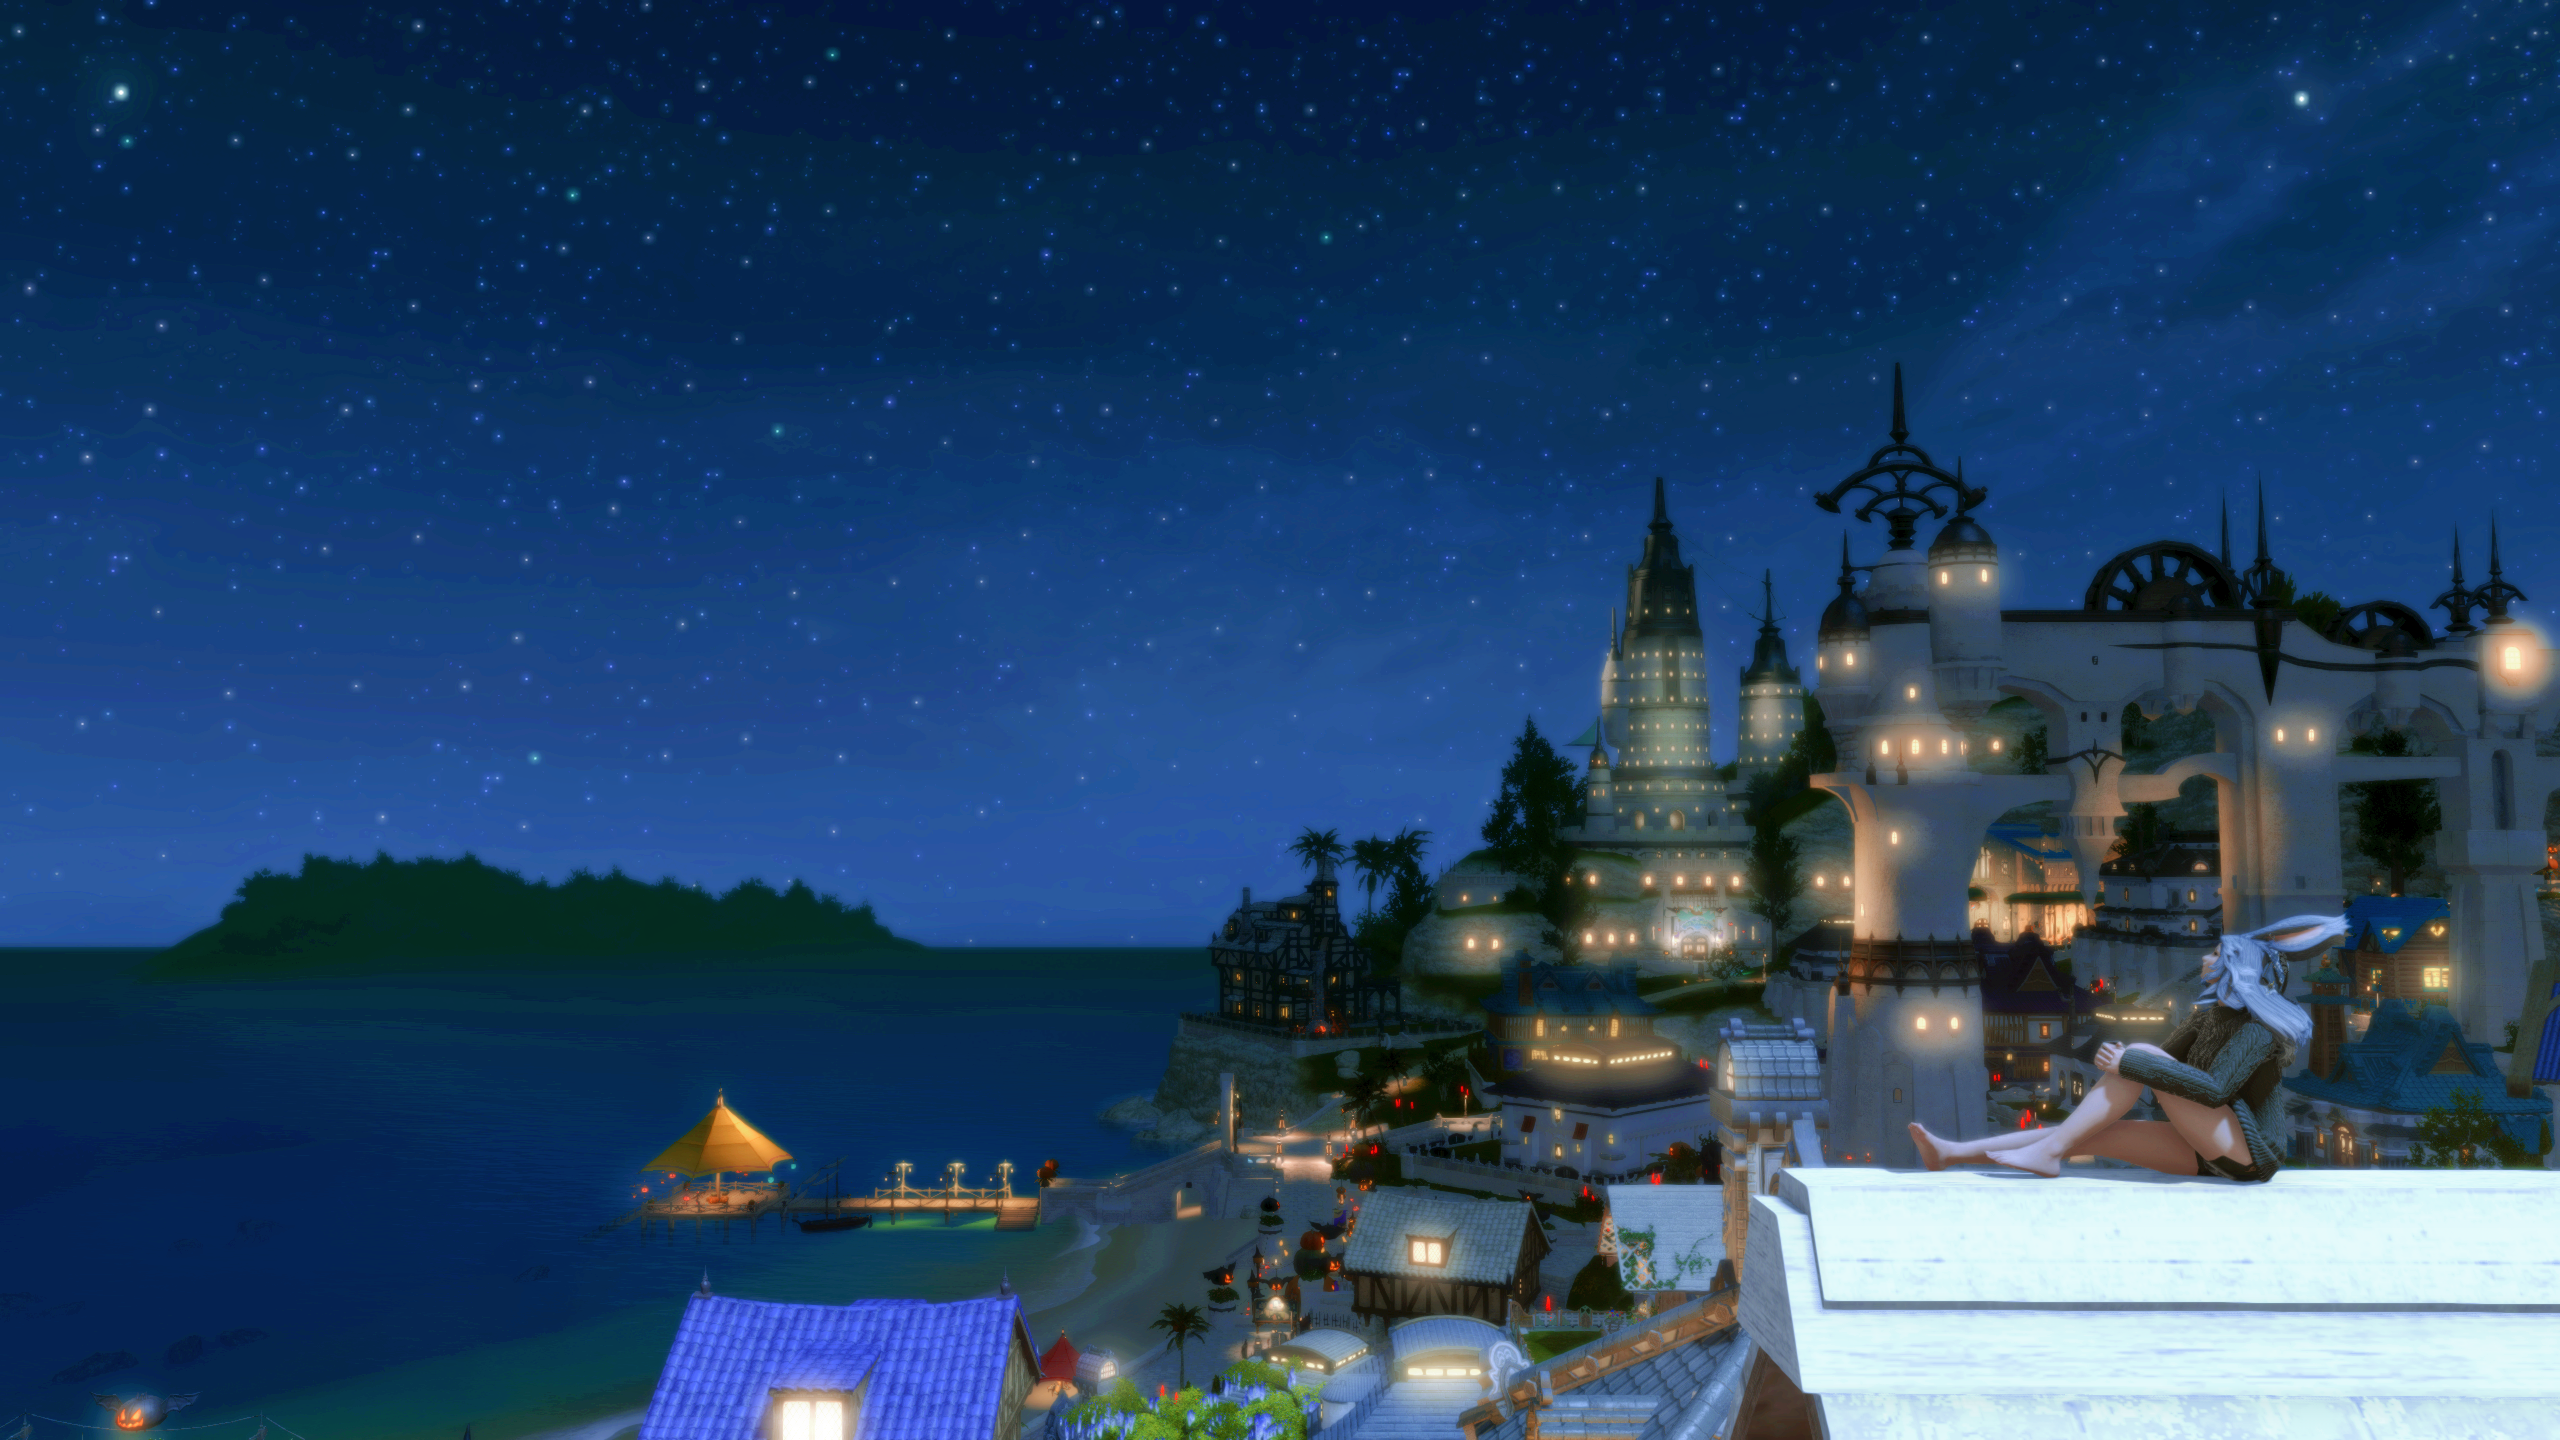 Final Fantasy 14 housing, with a viera sat on top of the house roof